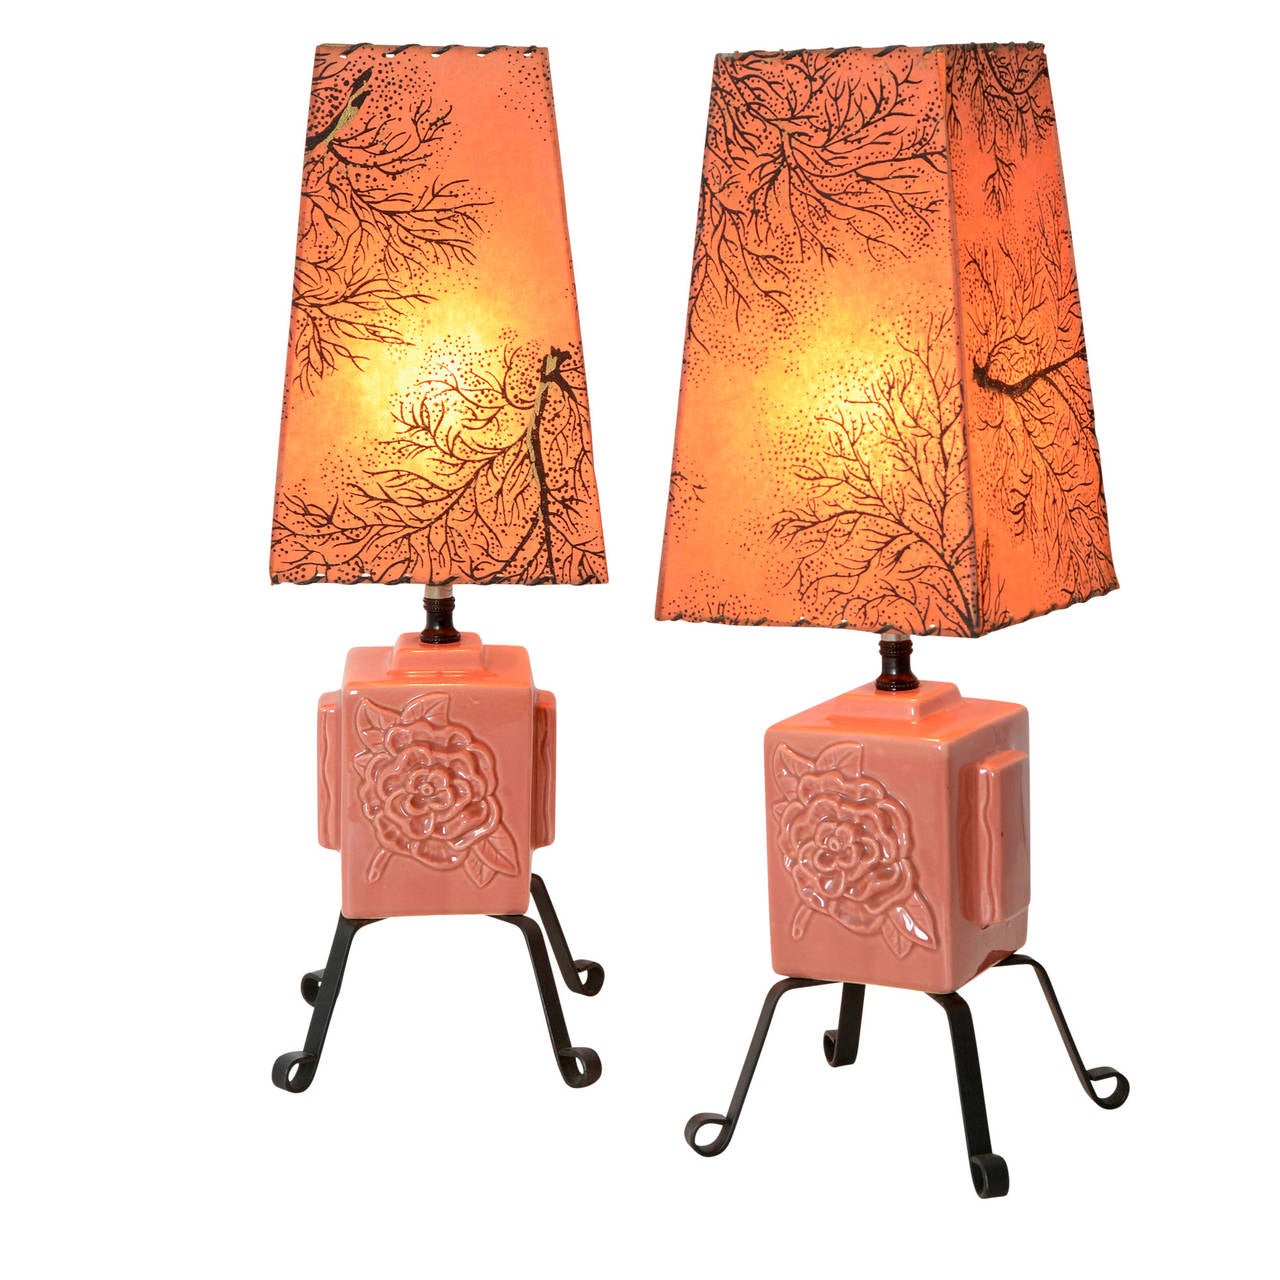 American Trio of Sweet and Modern Rose-Colored Table Lamps, circa 1955